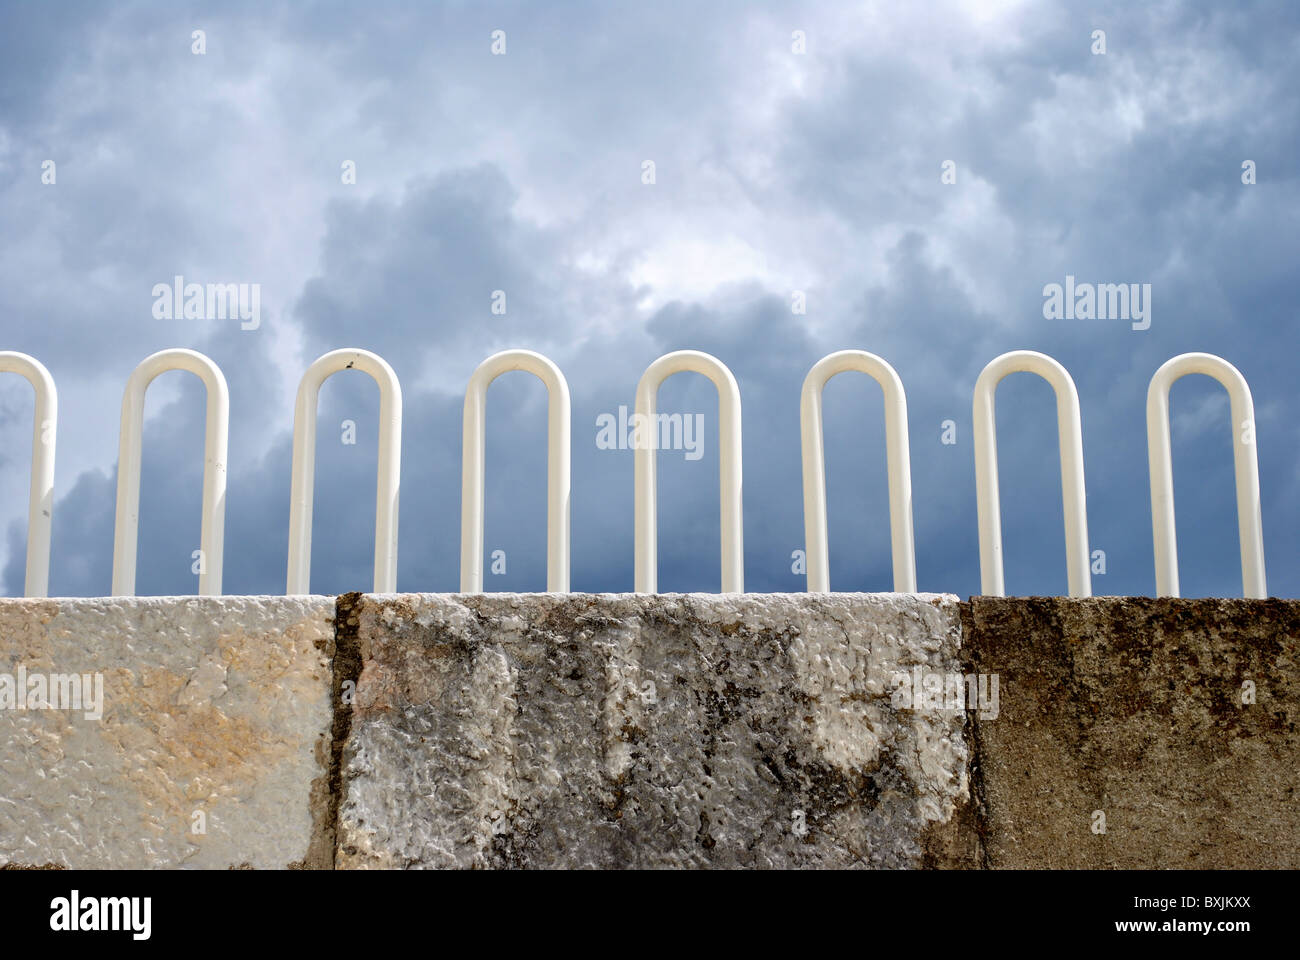 lard white stone and iron pipes for design and safety Stock Photo